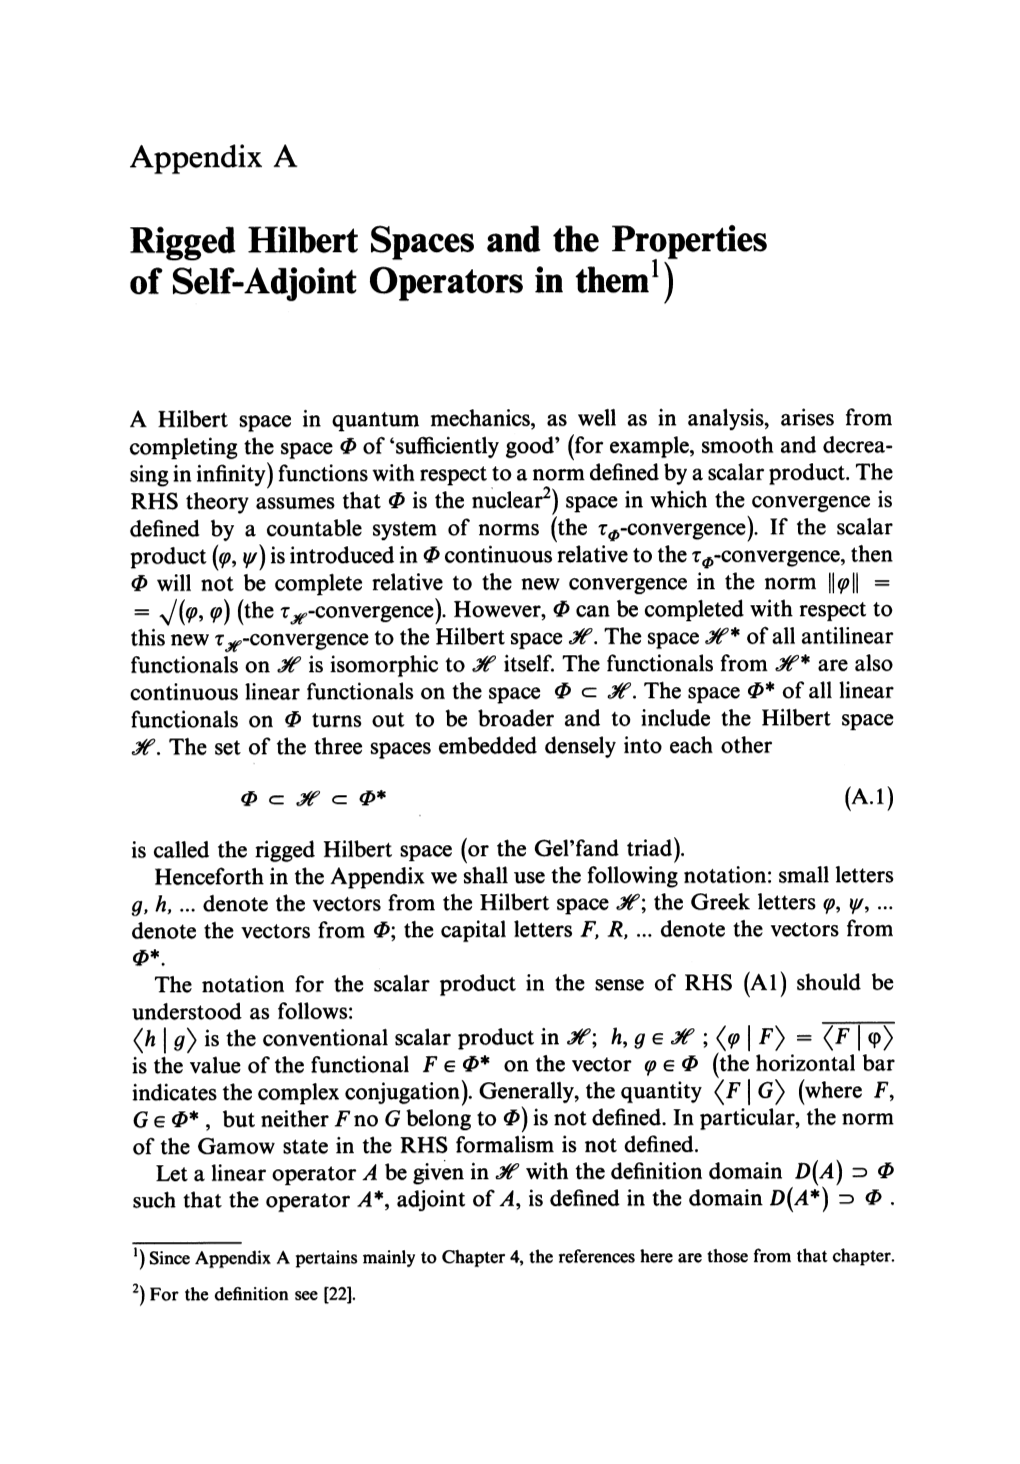 Rigged Hilbert Spaces and the Properties of Self-Adjoint Operators in Them']